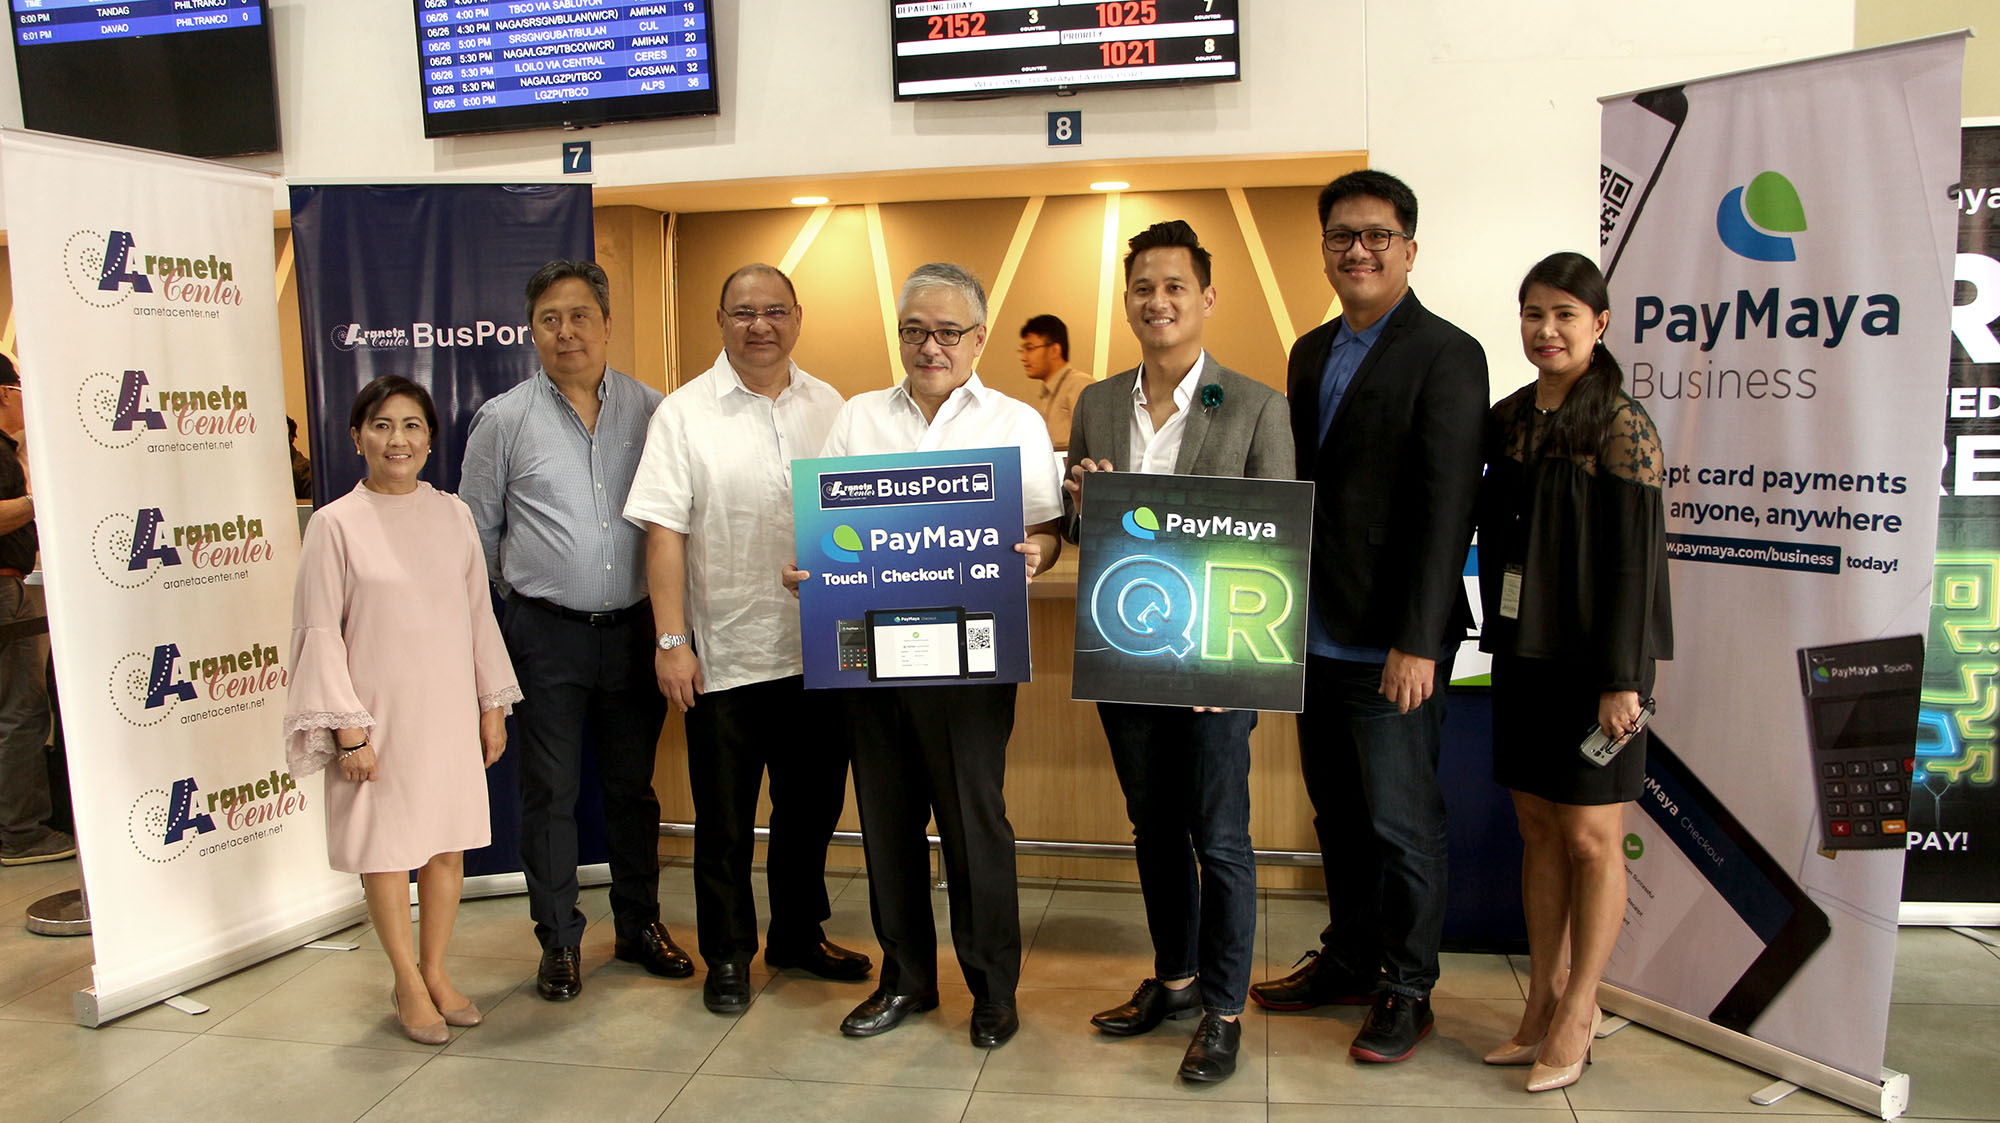 Araneta Center BusPort offers more convenience with online booking, cashless payment